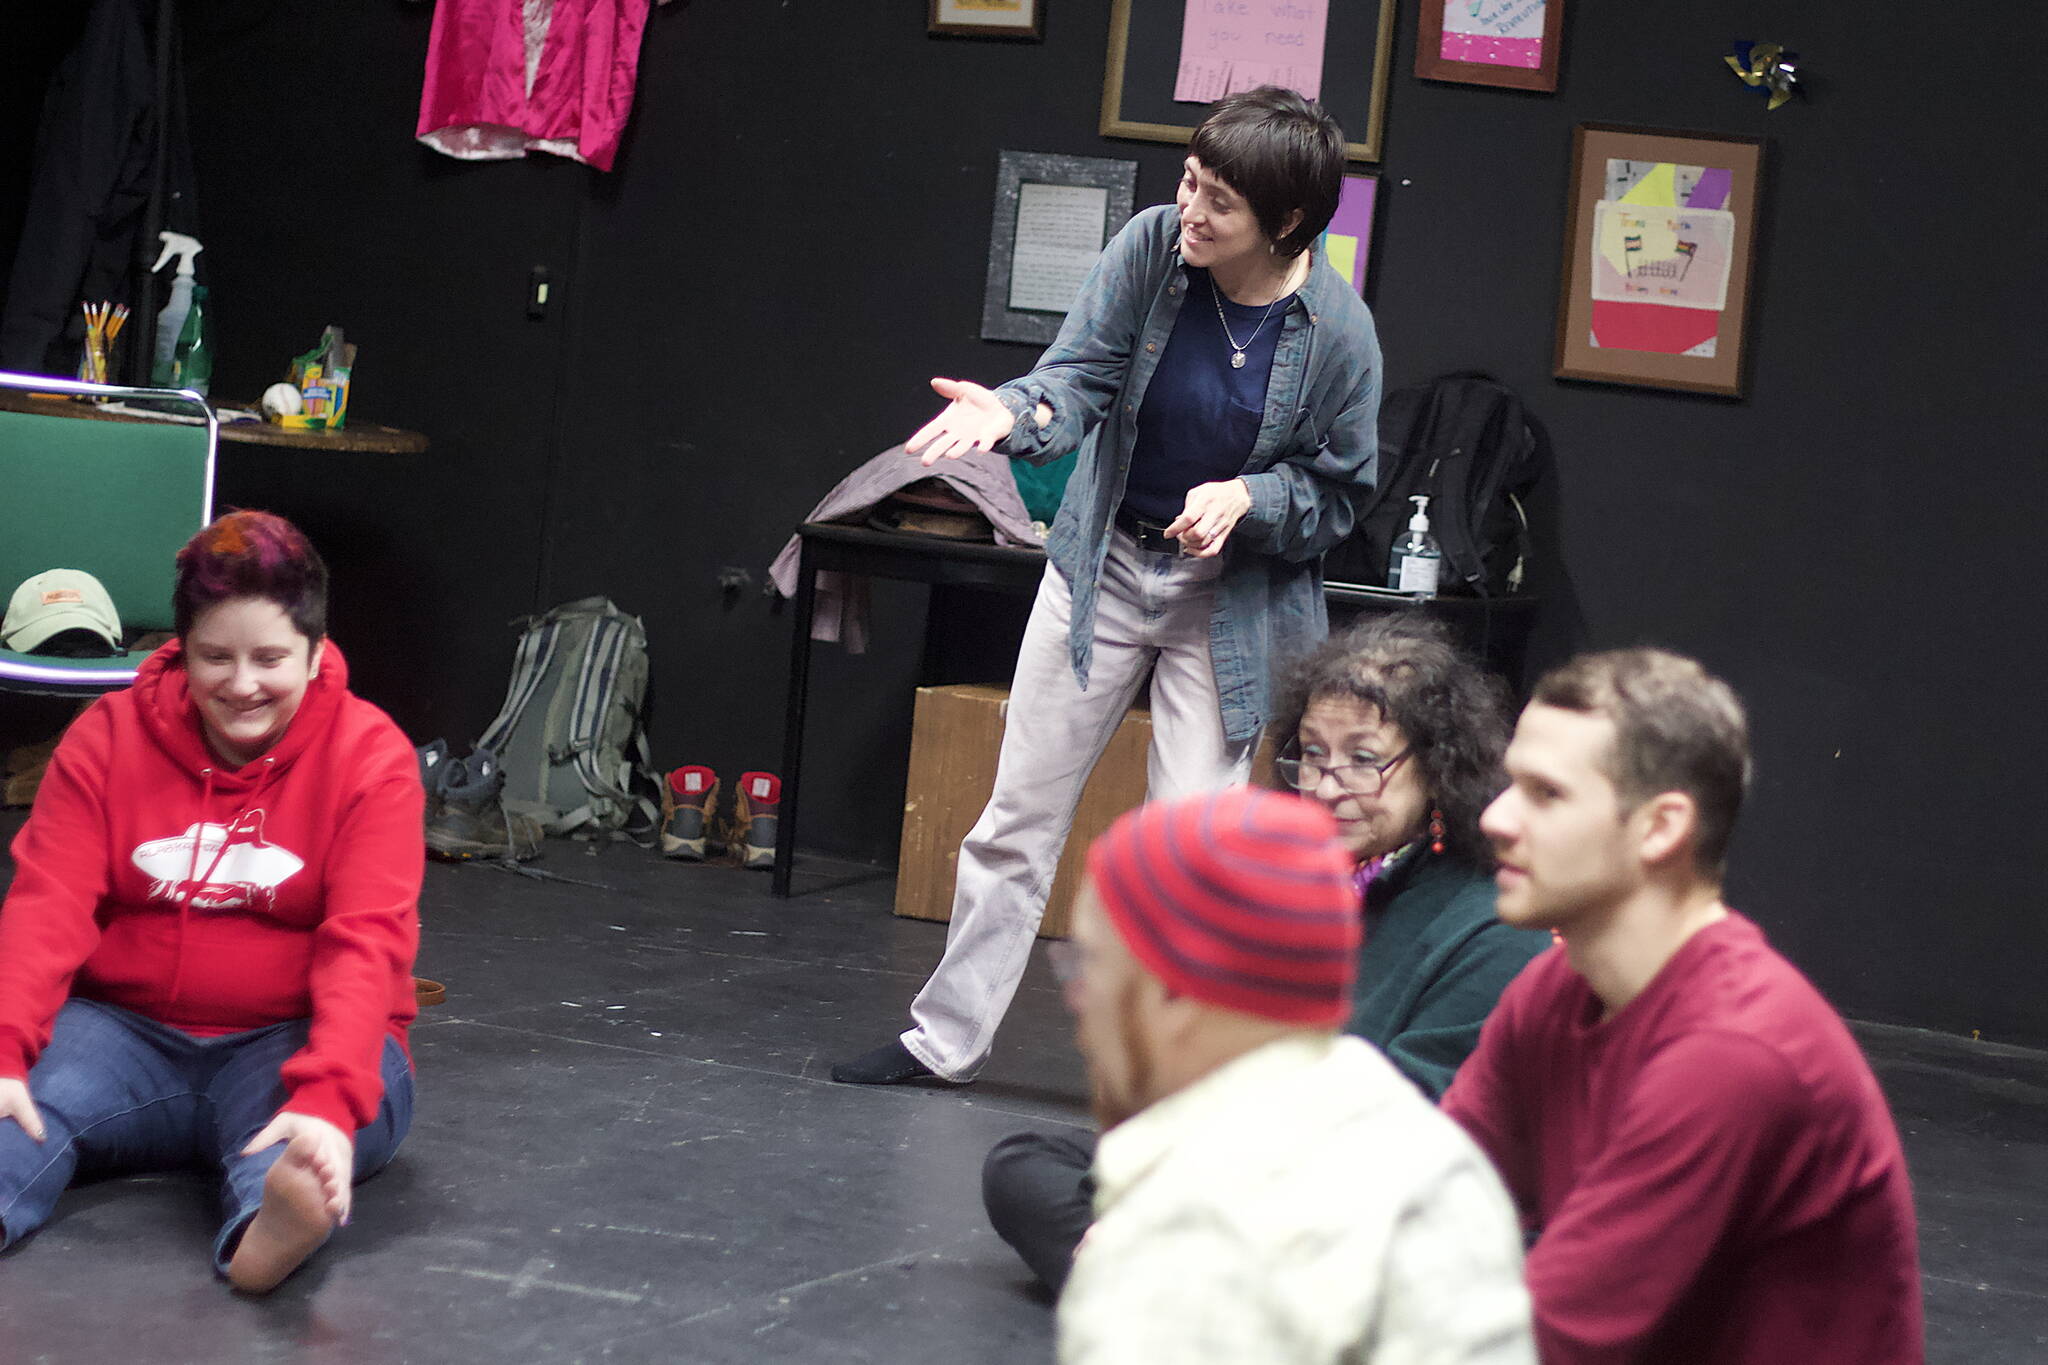 Tallie Medel, a Ketchikan native who’s soared to global fame recently as a co-star in “Everything Everywhere All At Once, instructs students during a clown class at Perseverance Theatre on Tuesday night. (Mark Sabbatini / Juneau Empire)